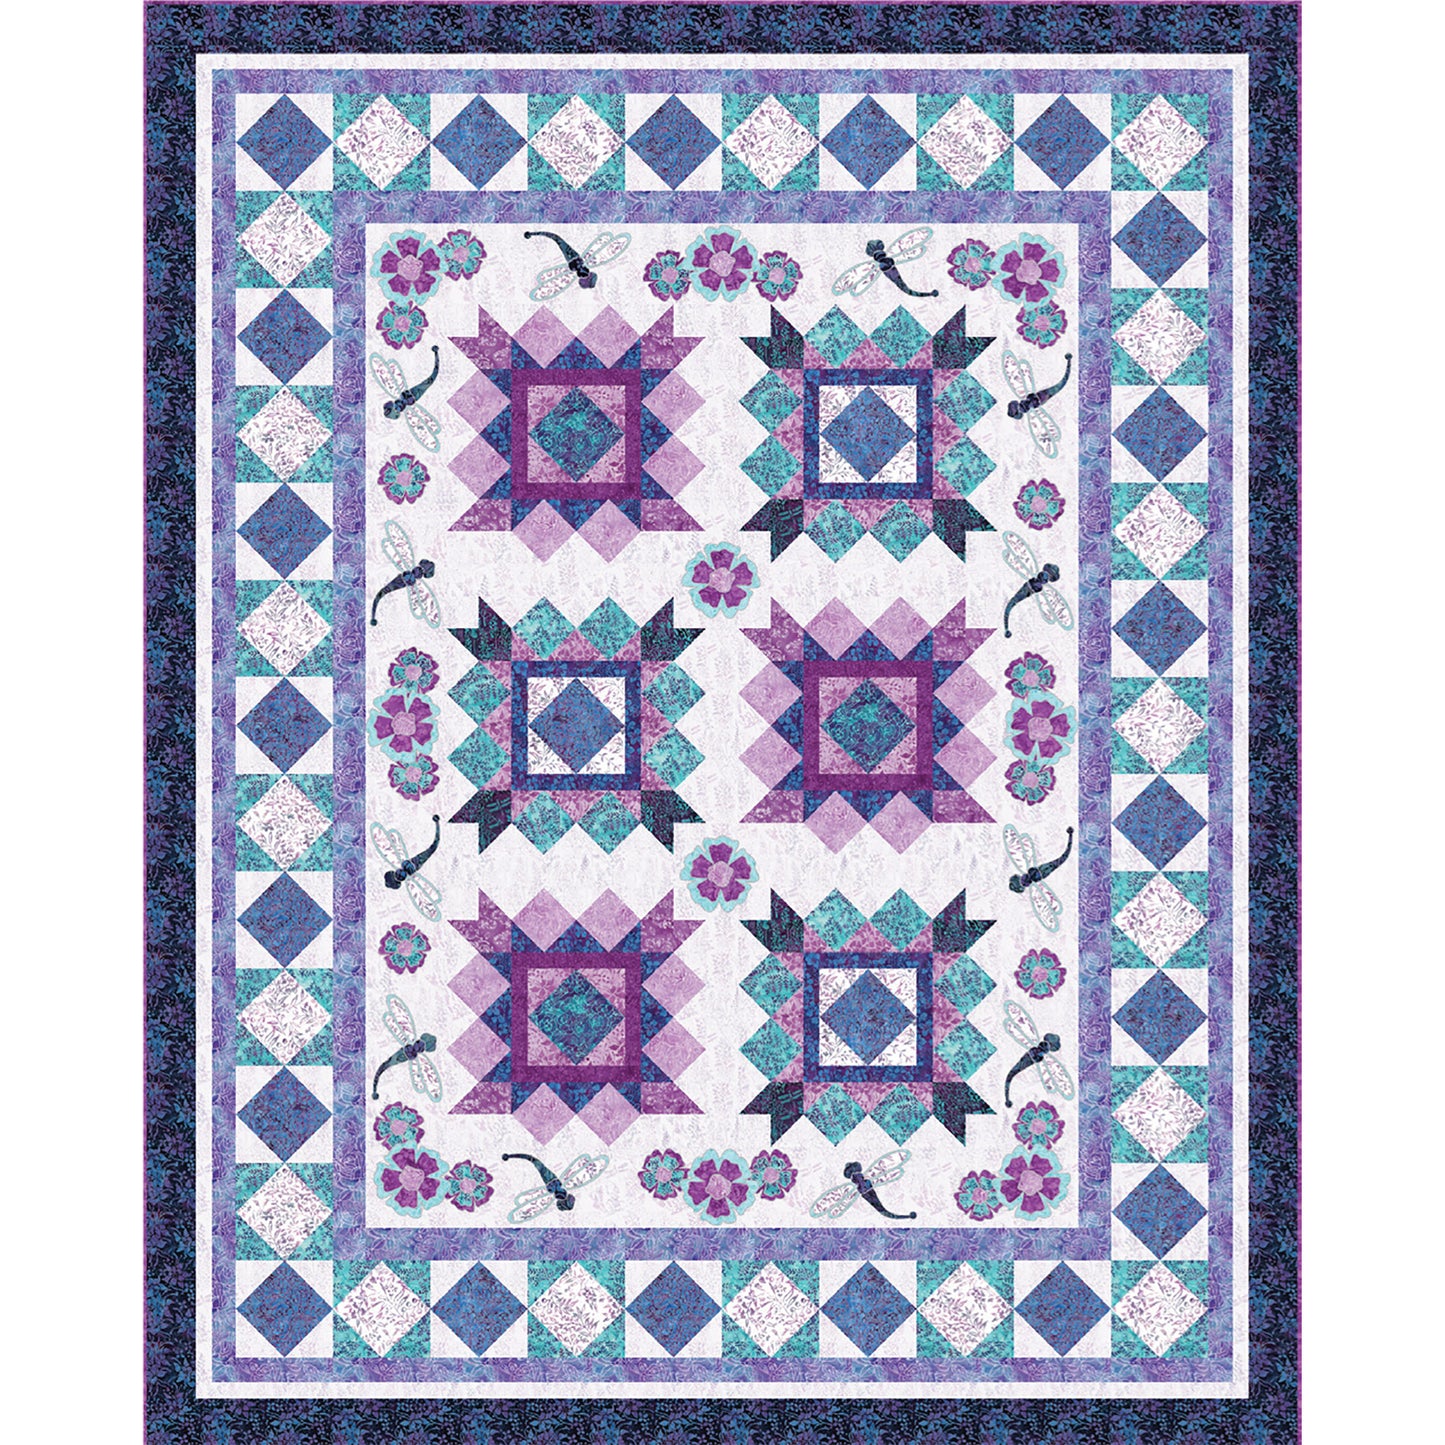 Dragonflies and Posies Quilt TWW-0966e - Downloadable Pattern